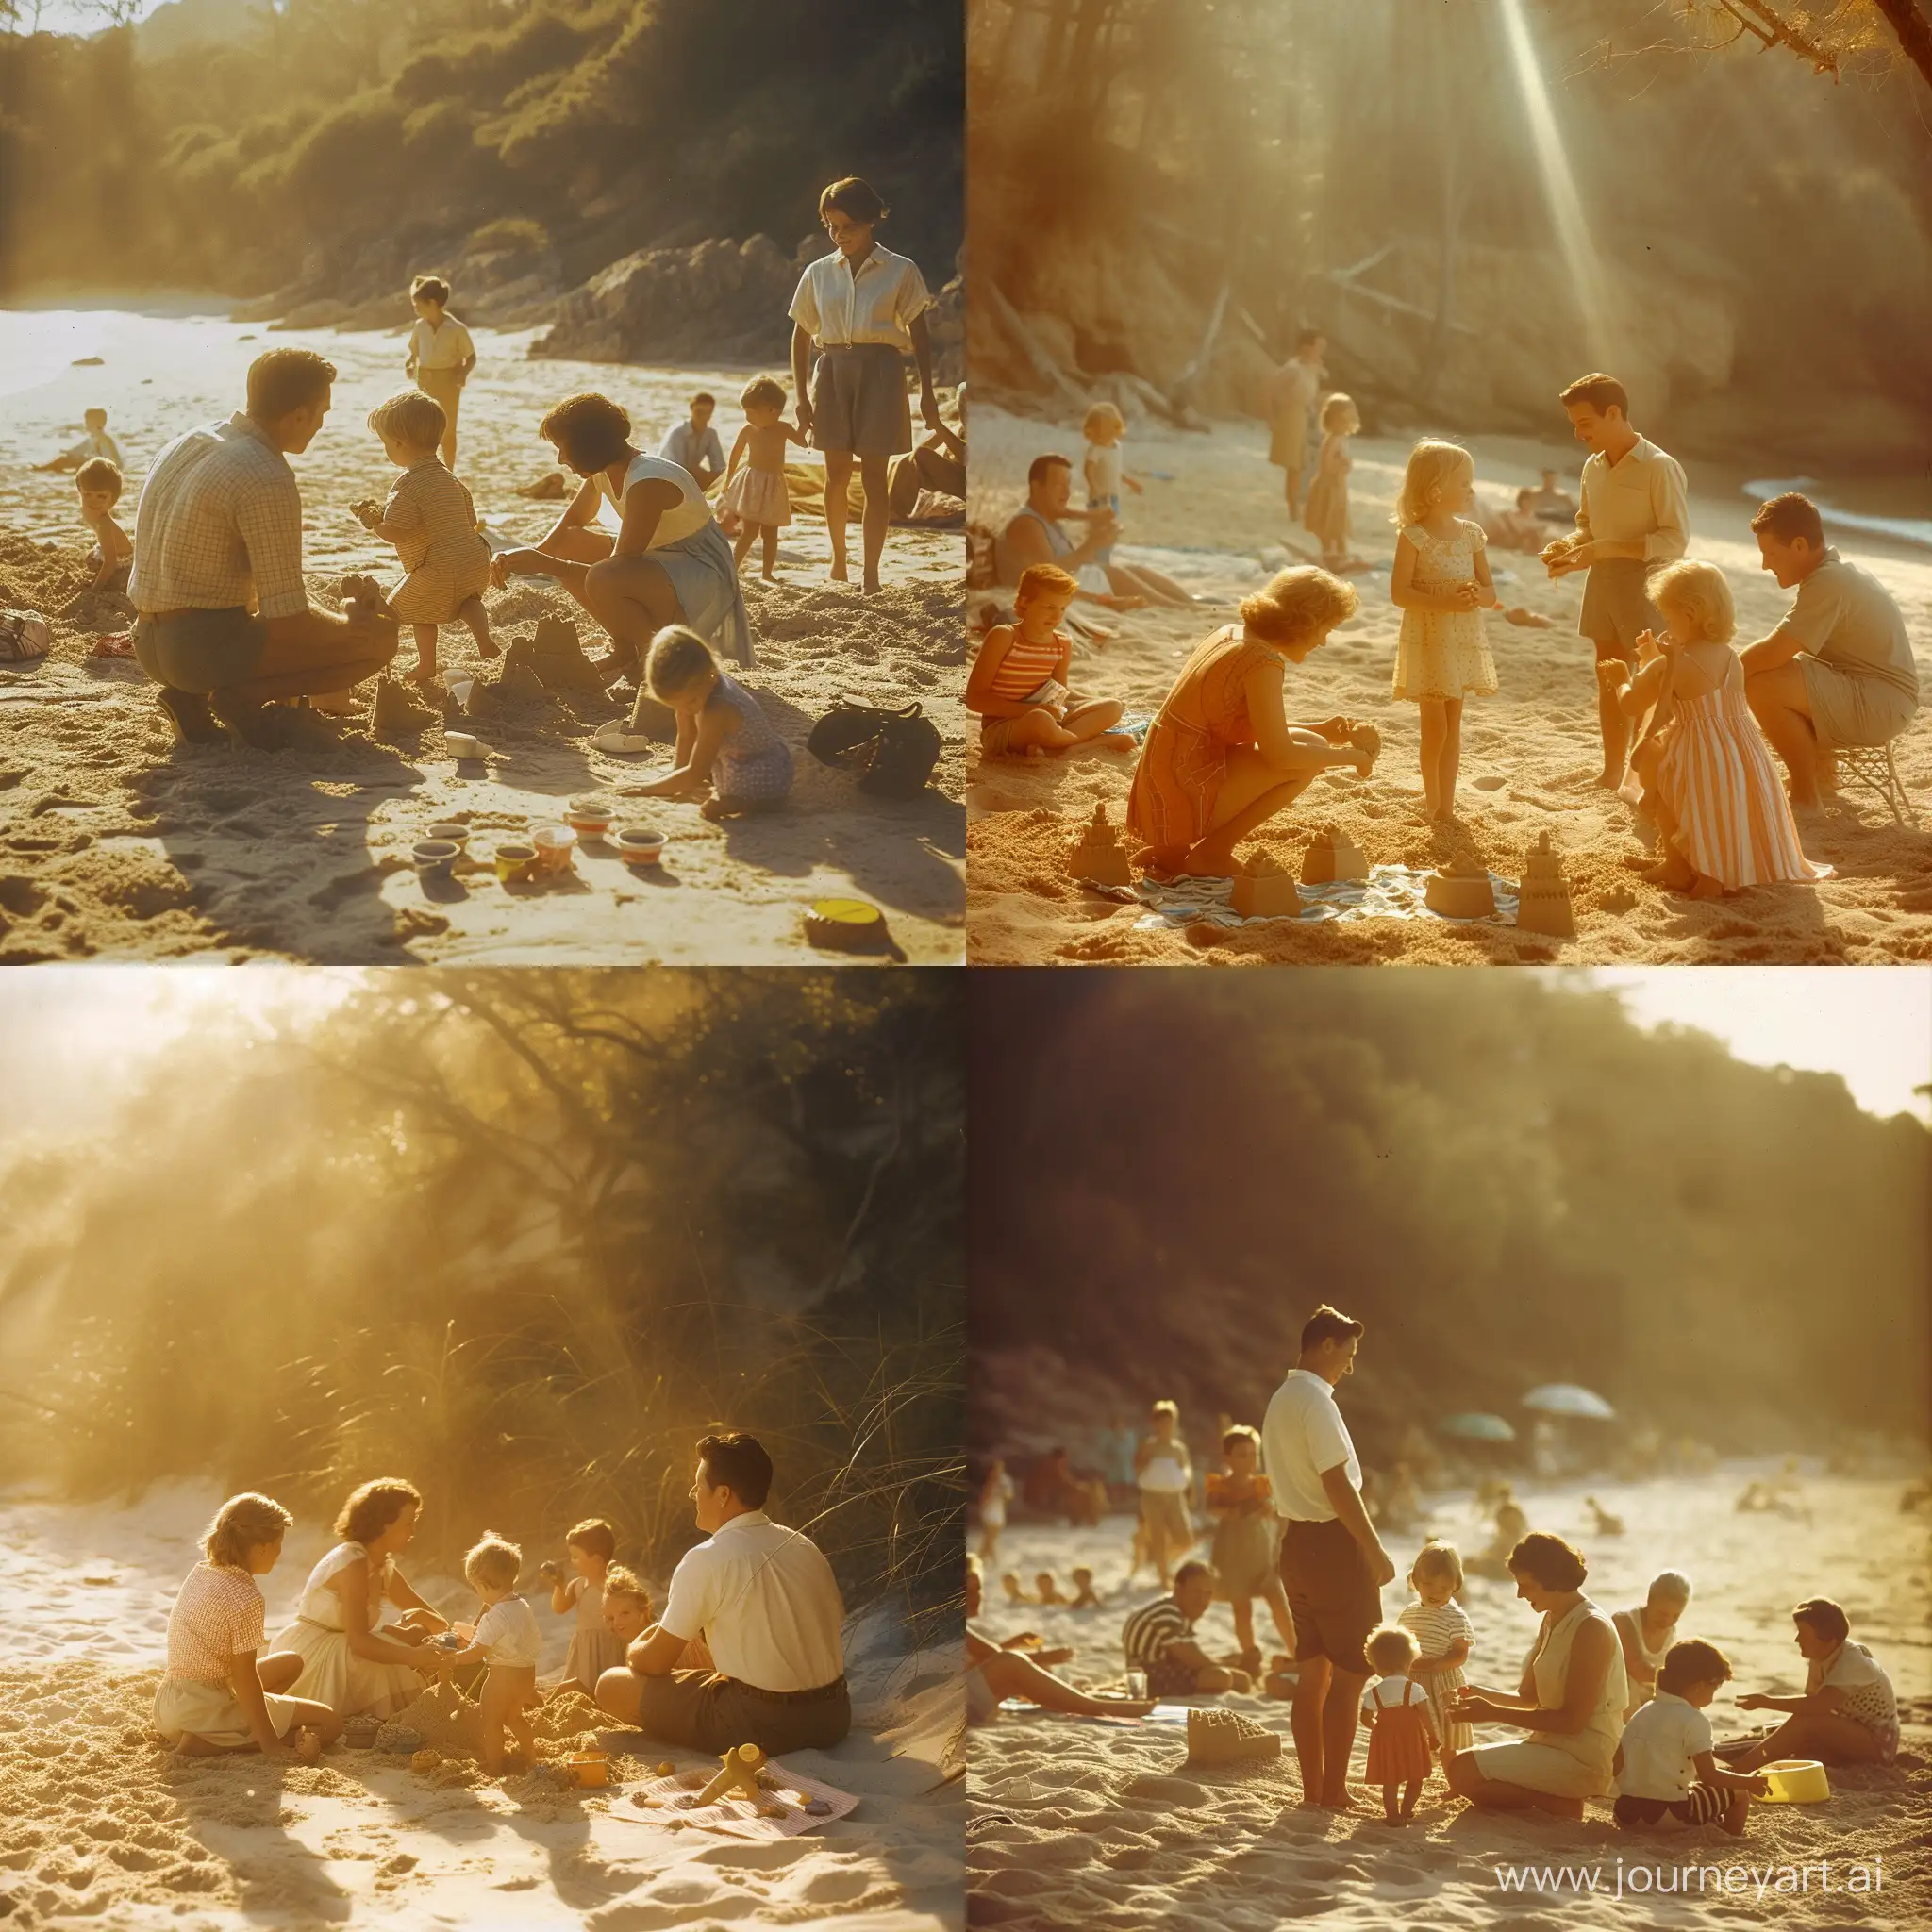 Create an image of a 1960s family gathering on a sandy beach during the golden hour. The family is captured in candid moments, engaging in beach activities such as building sandcastles and playing beach games. The golden sunlight bathes the scene, casting long, soft shadows.